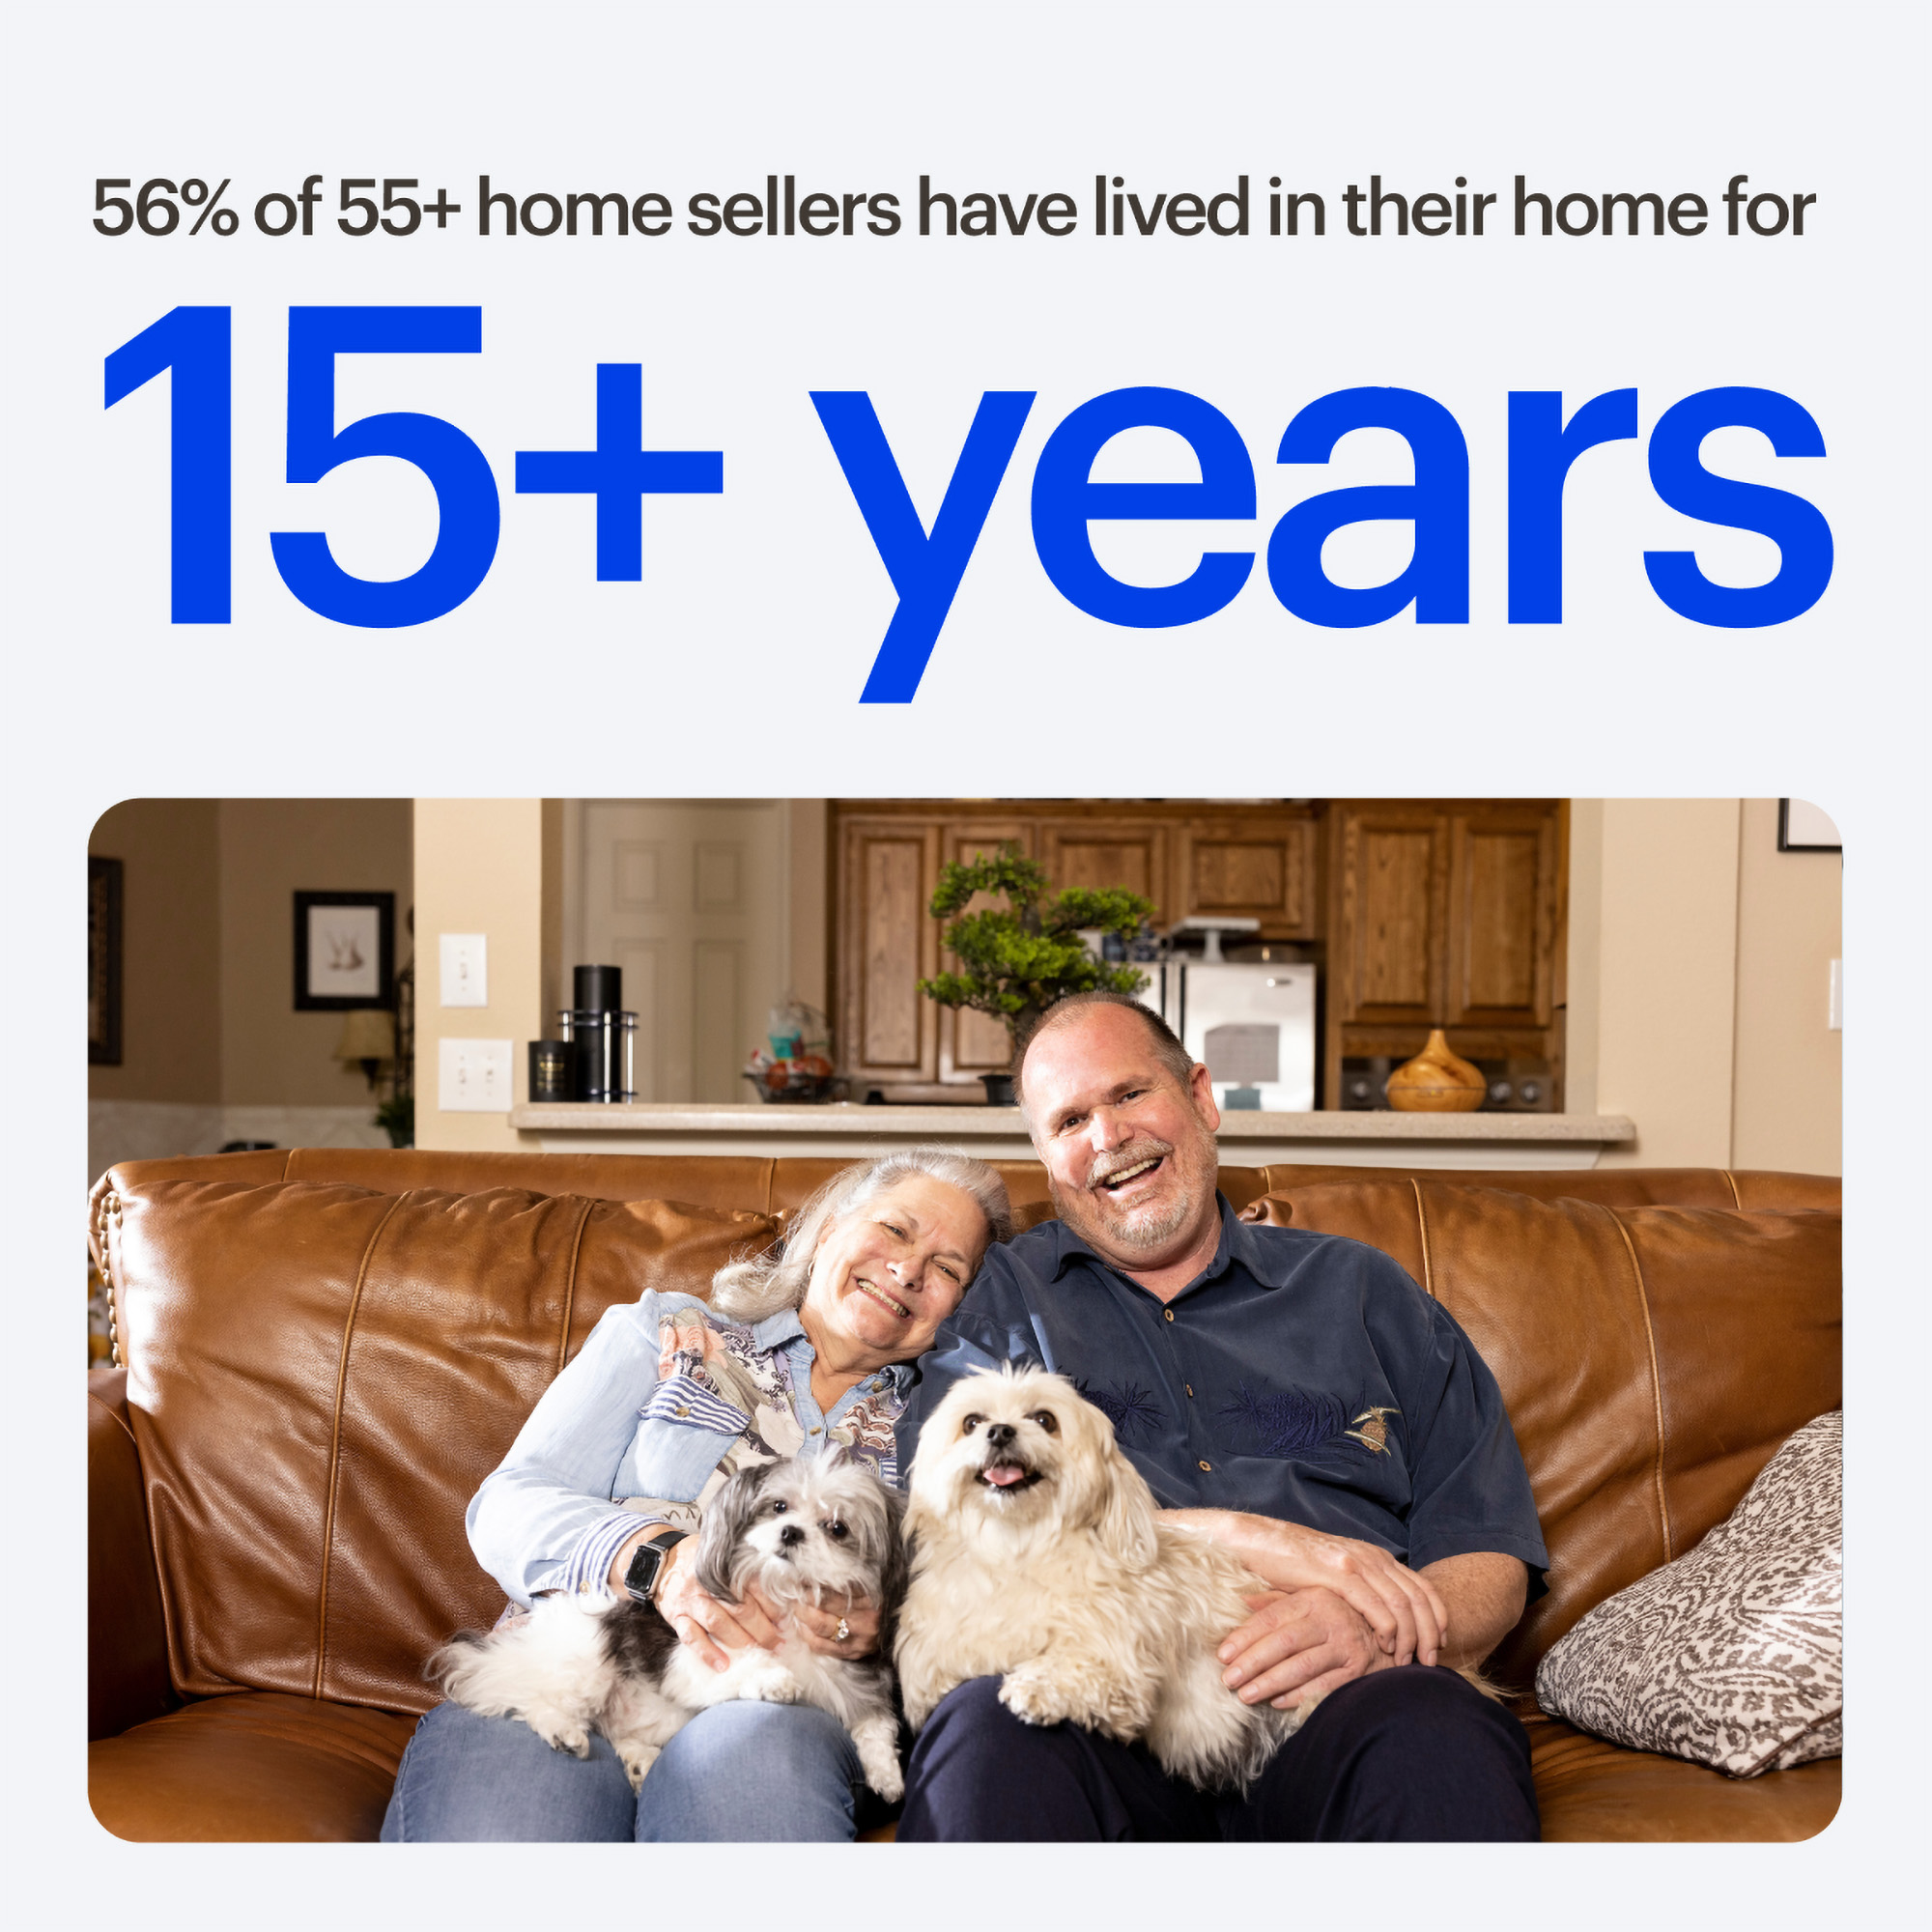 56% of 55+ home sellers have lived in their home for over 15 years